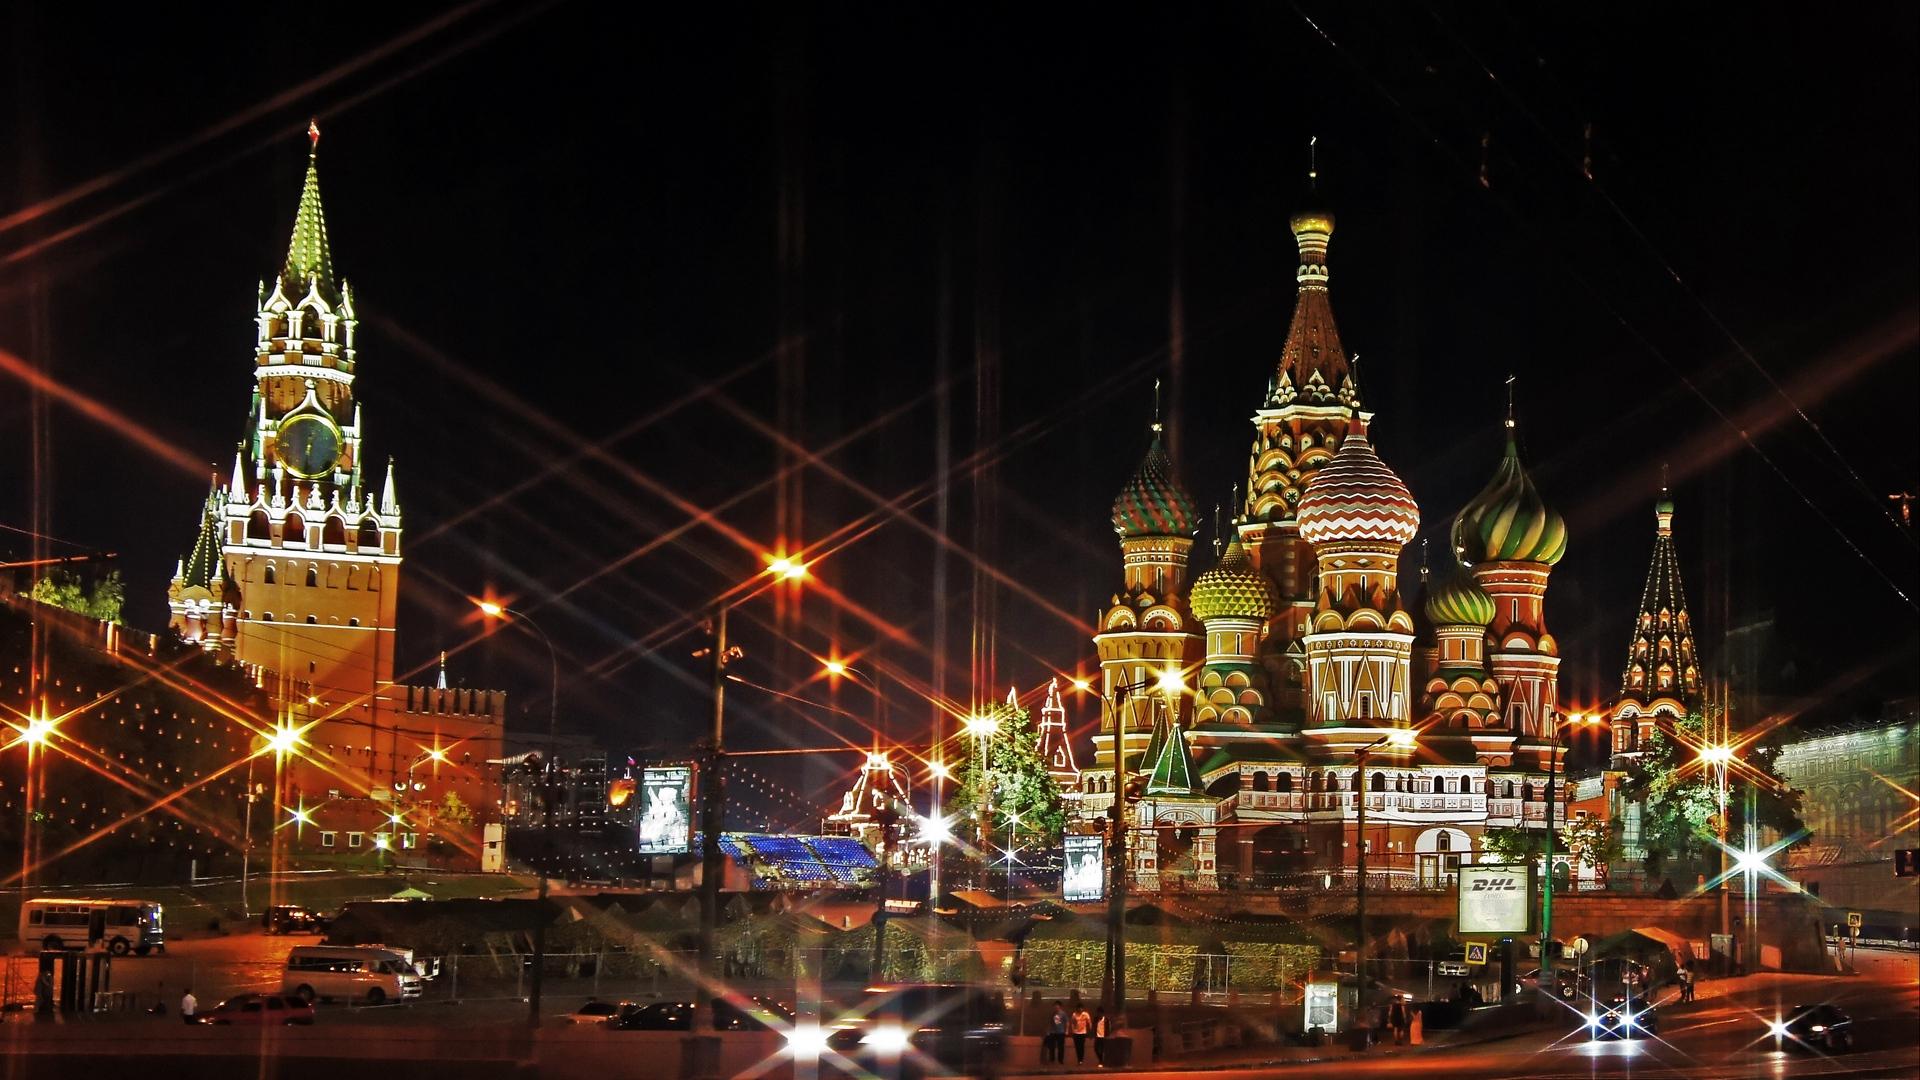 Download wallpaper 1920x1080 moscow, russia, red square, light